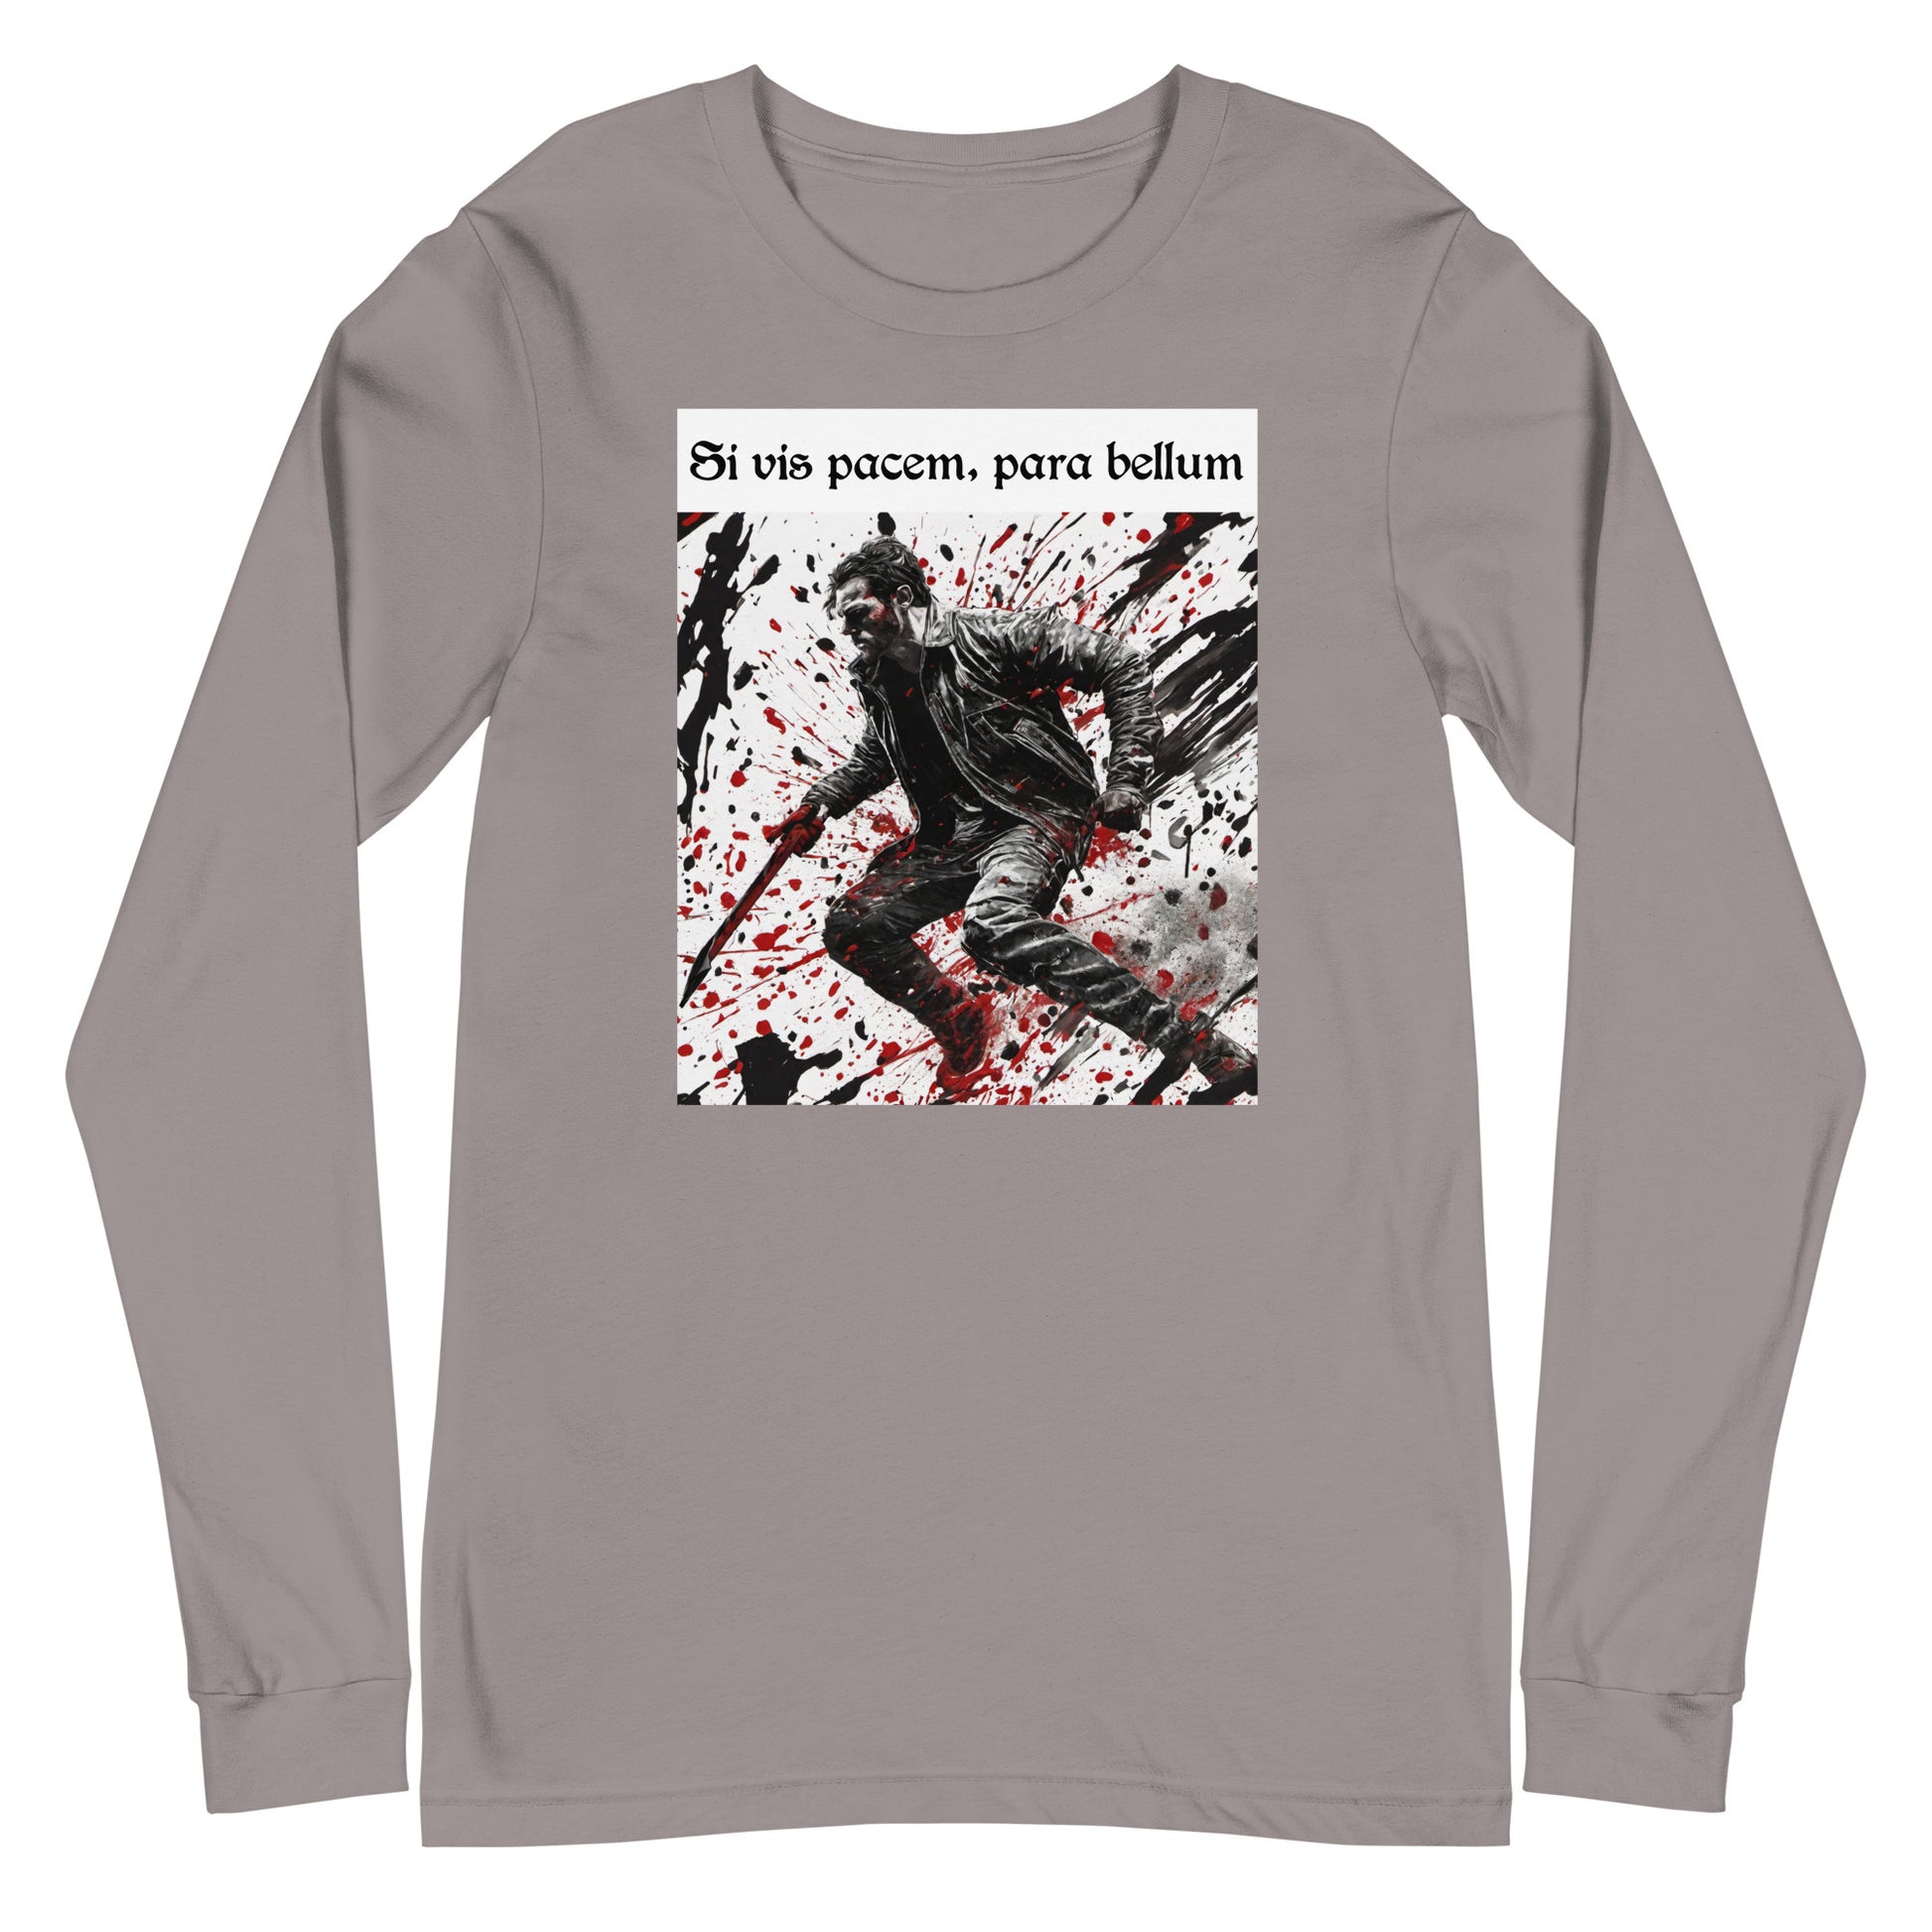 If You Want Peace, Prepare for War Men's Long Sleeve Tee Storm